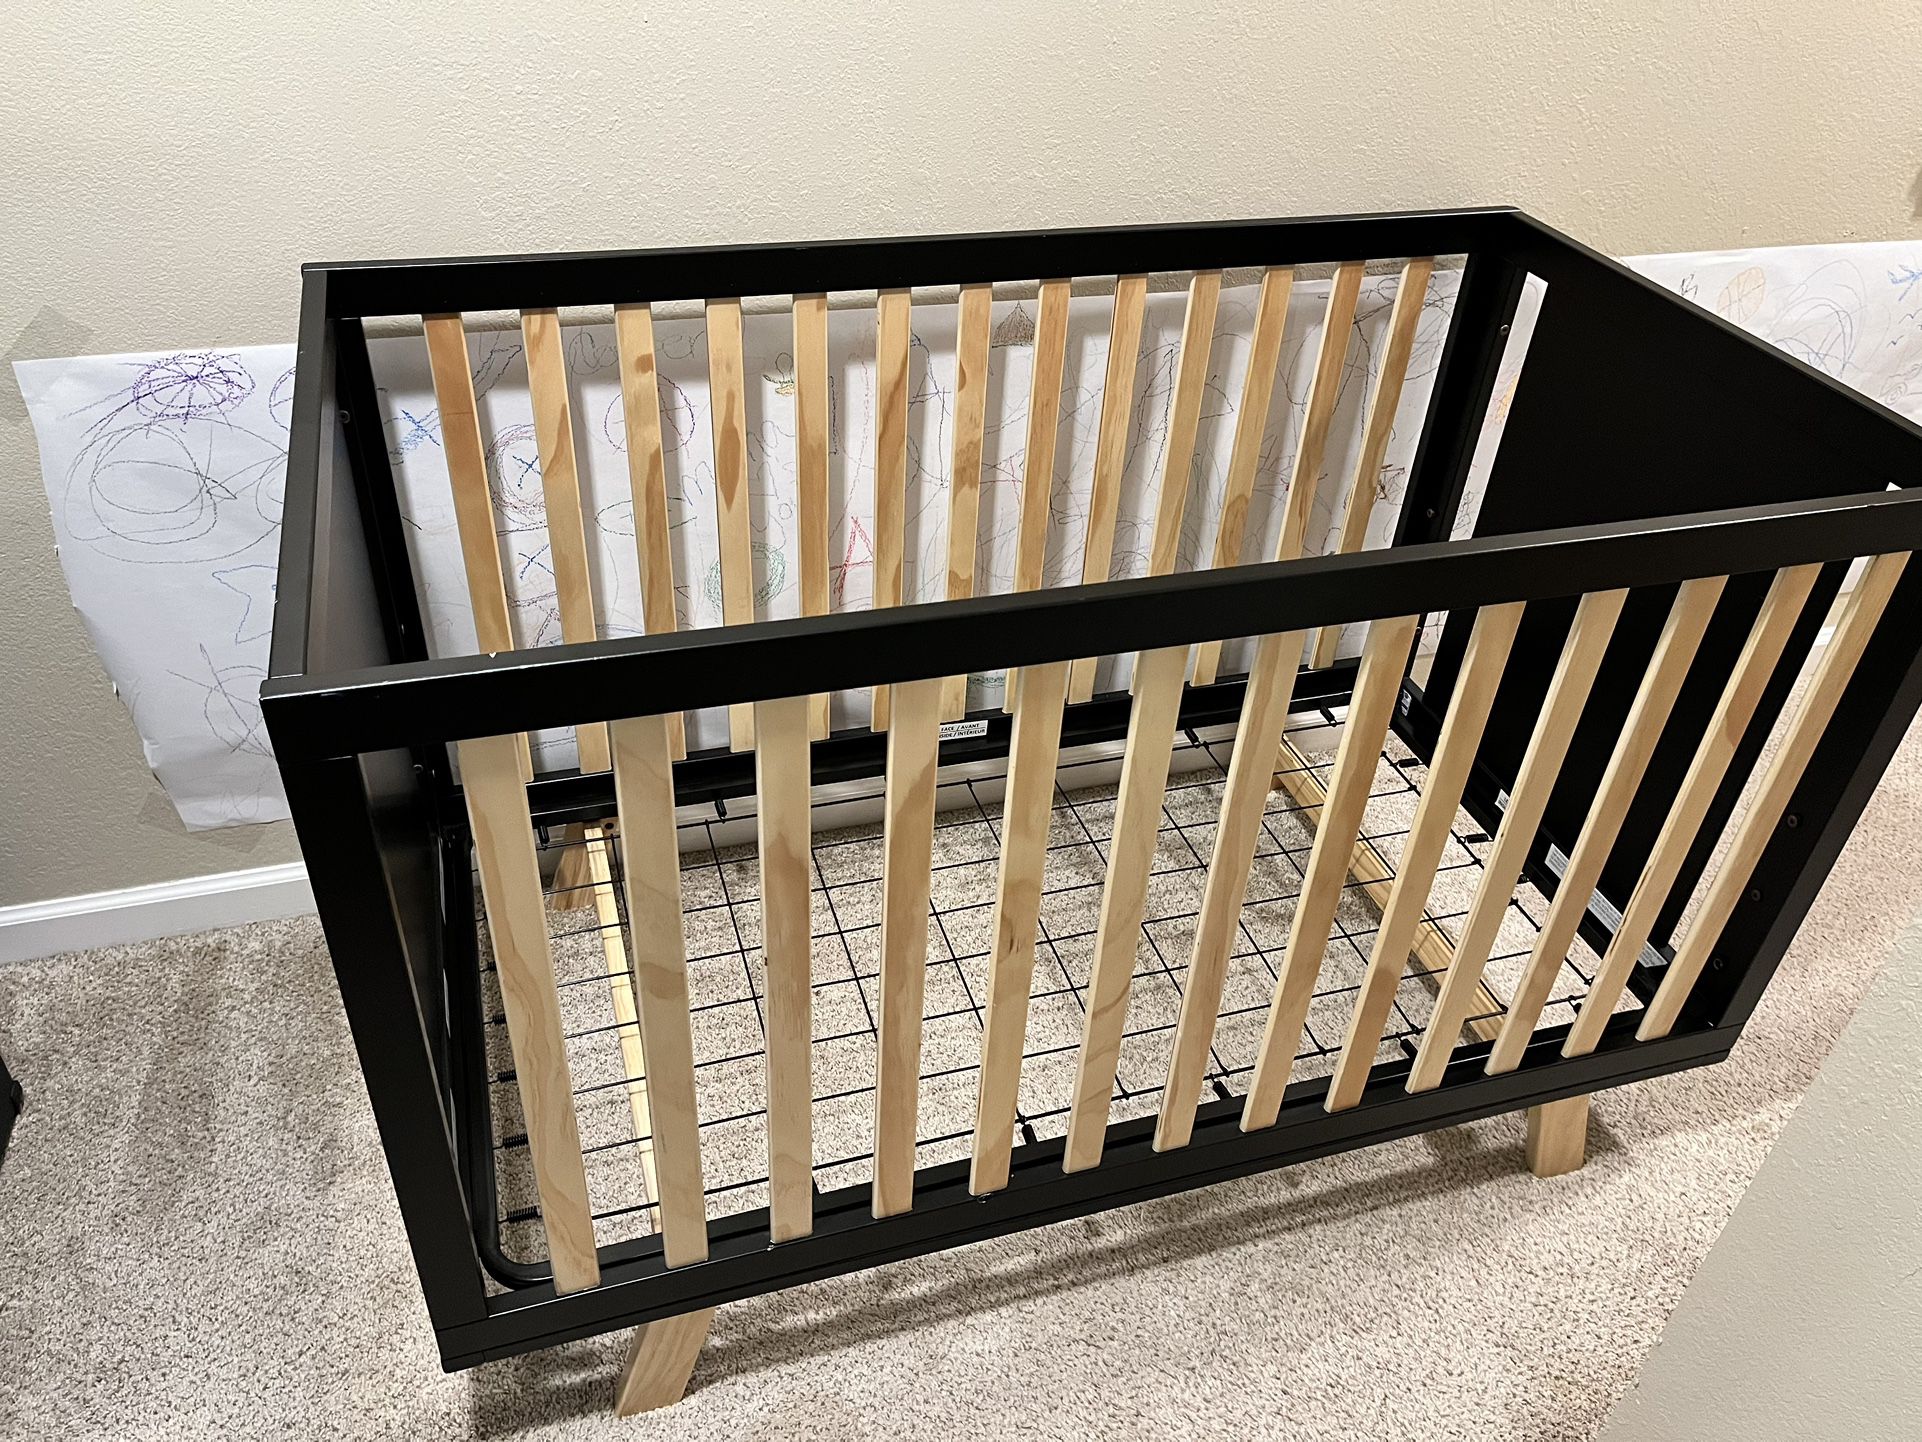 Used Crib For Sale - Great Condition